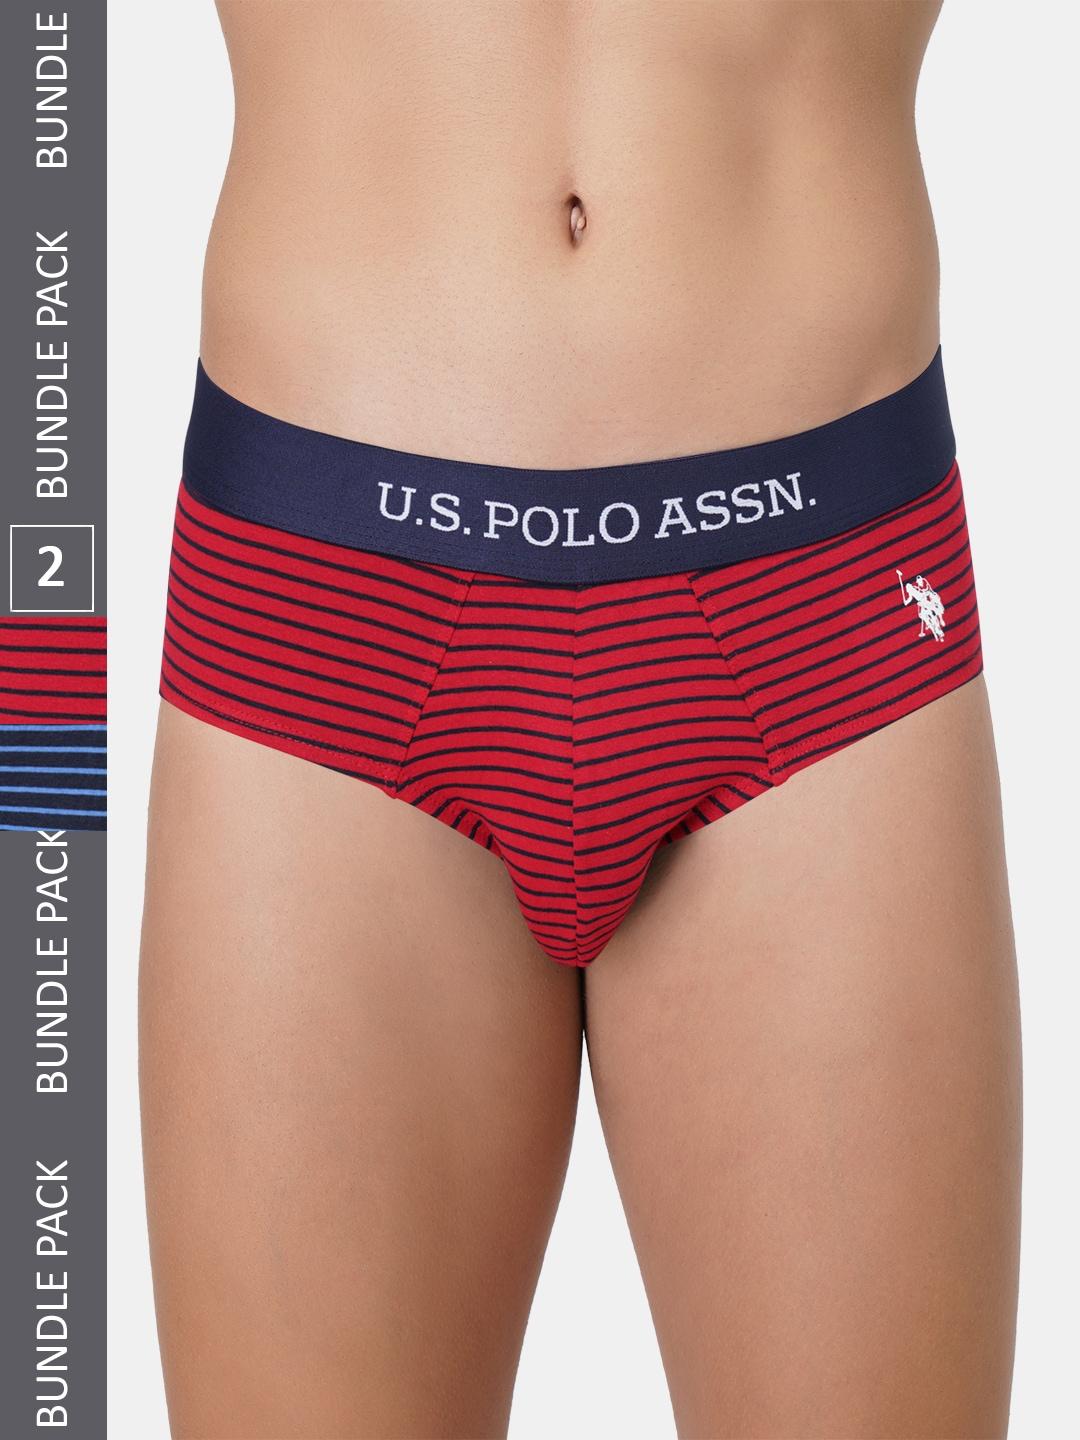 u.s. polo assn. mens pack of 2 striped mid rise anti bacterial basic briefs